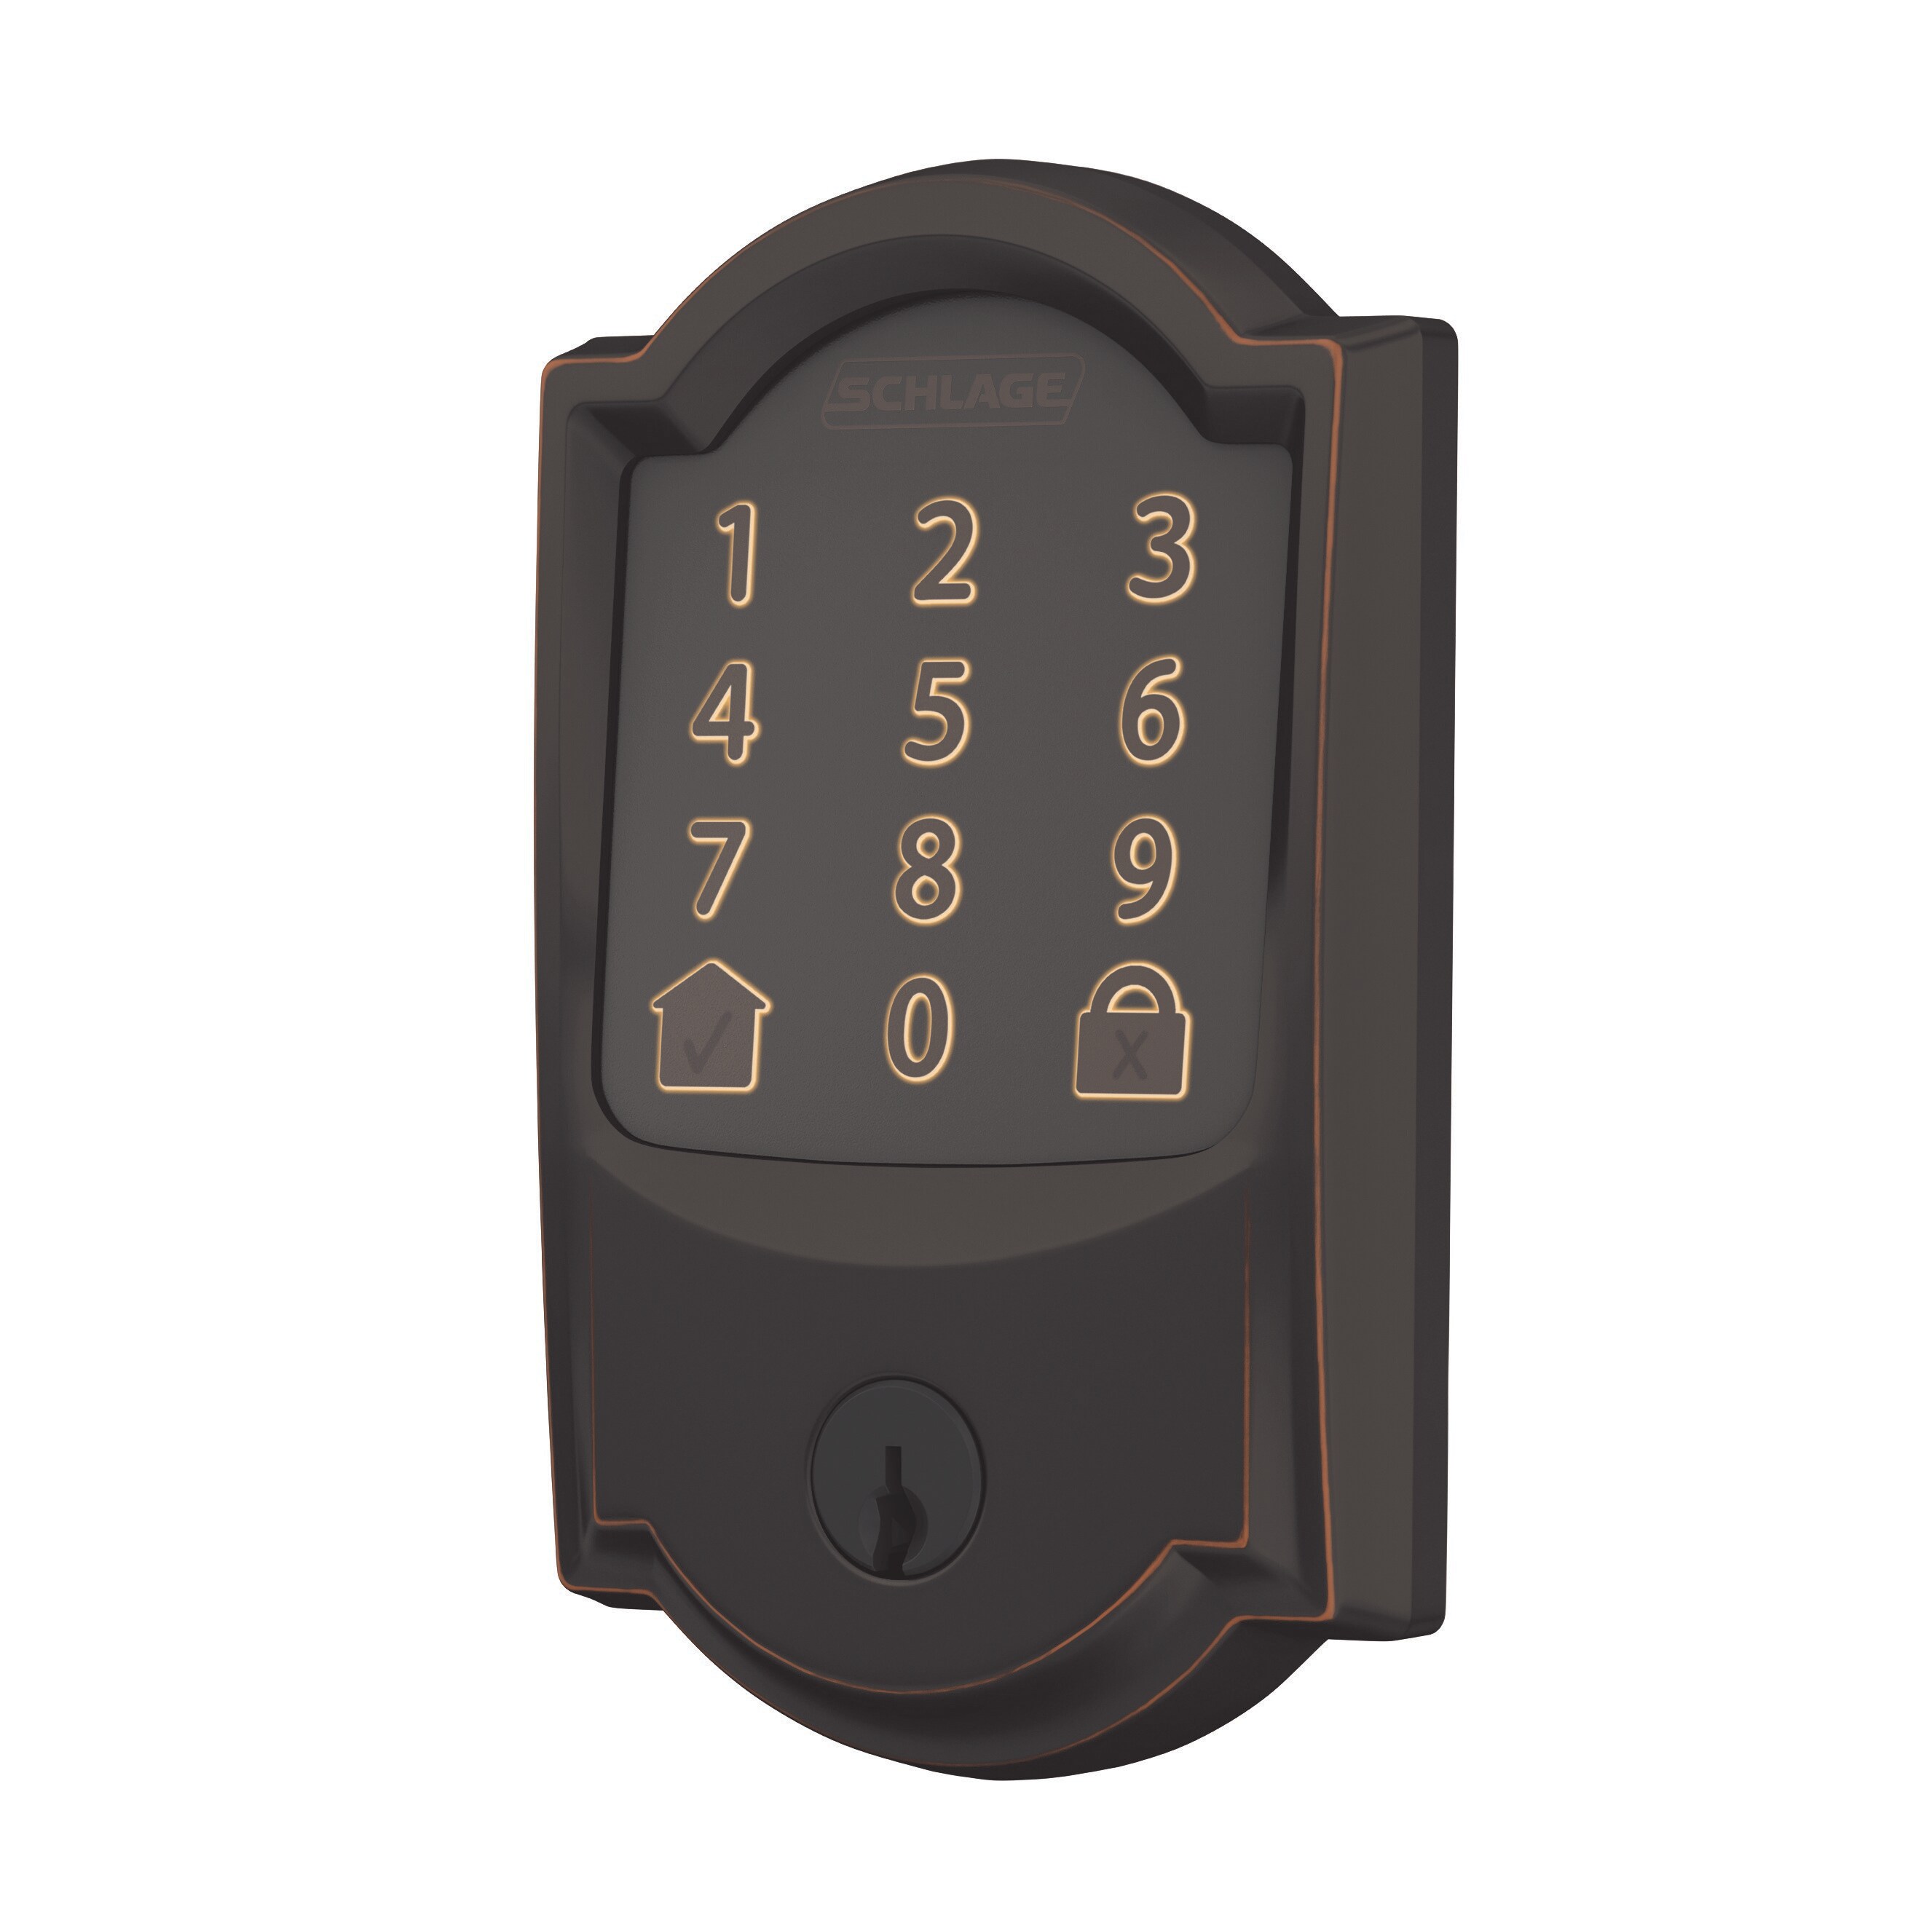 Schlage Encode Camelot Aged Bronze Wifi Single Cylinder Electronic Deadbolt  Lighted Keypad Touchscreen Smart Lock in the Electronic Door Locks  department at